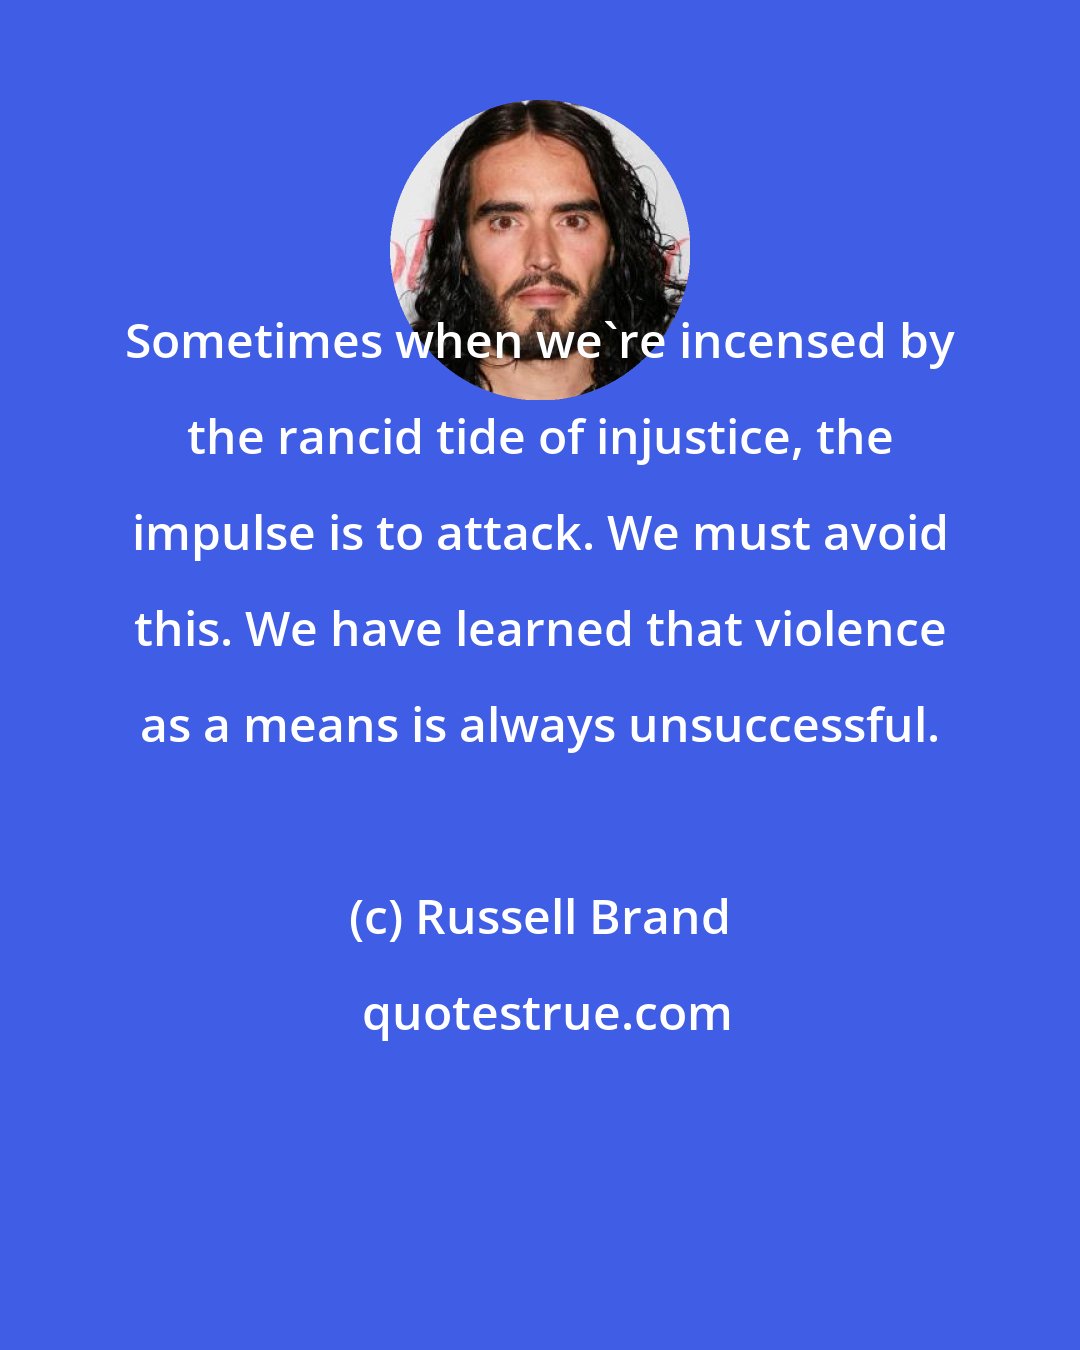 Russell Brand: Sometimes when we're incensed by the rancid tide of injustice, the impulse is to attack. We must avoid this. We have learned that violence as a means is always unsuccessful.